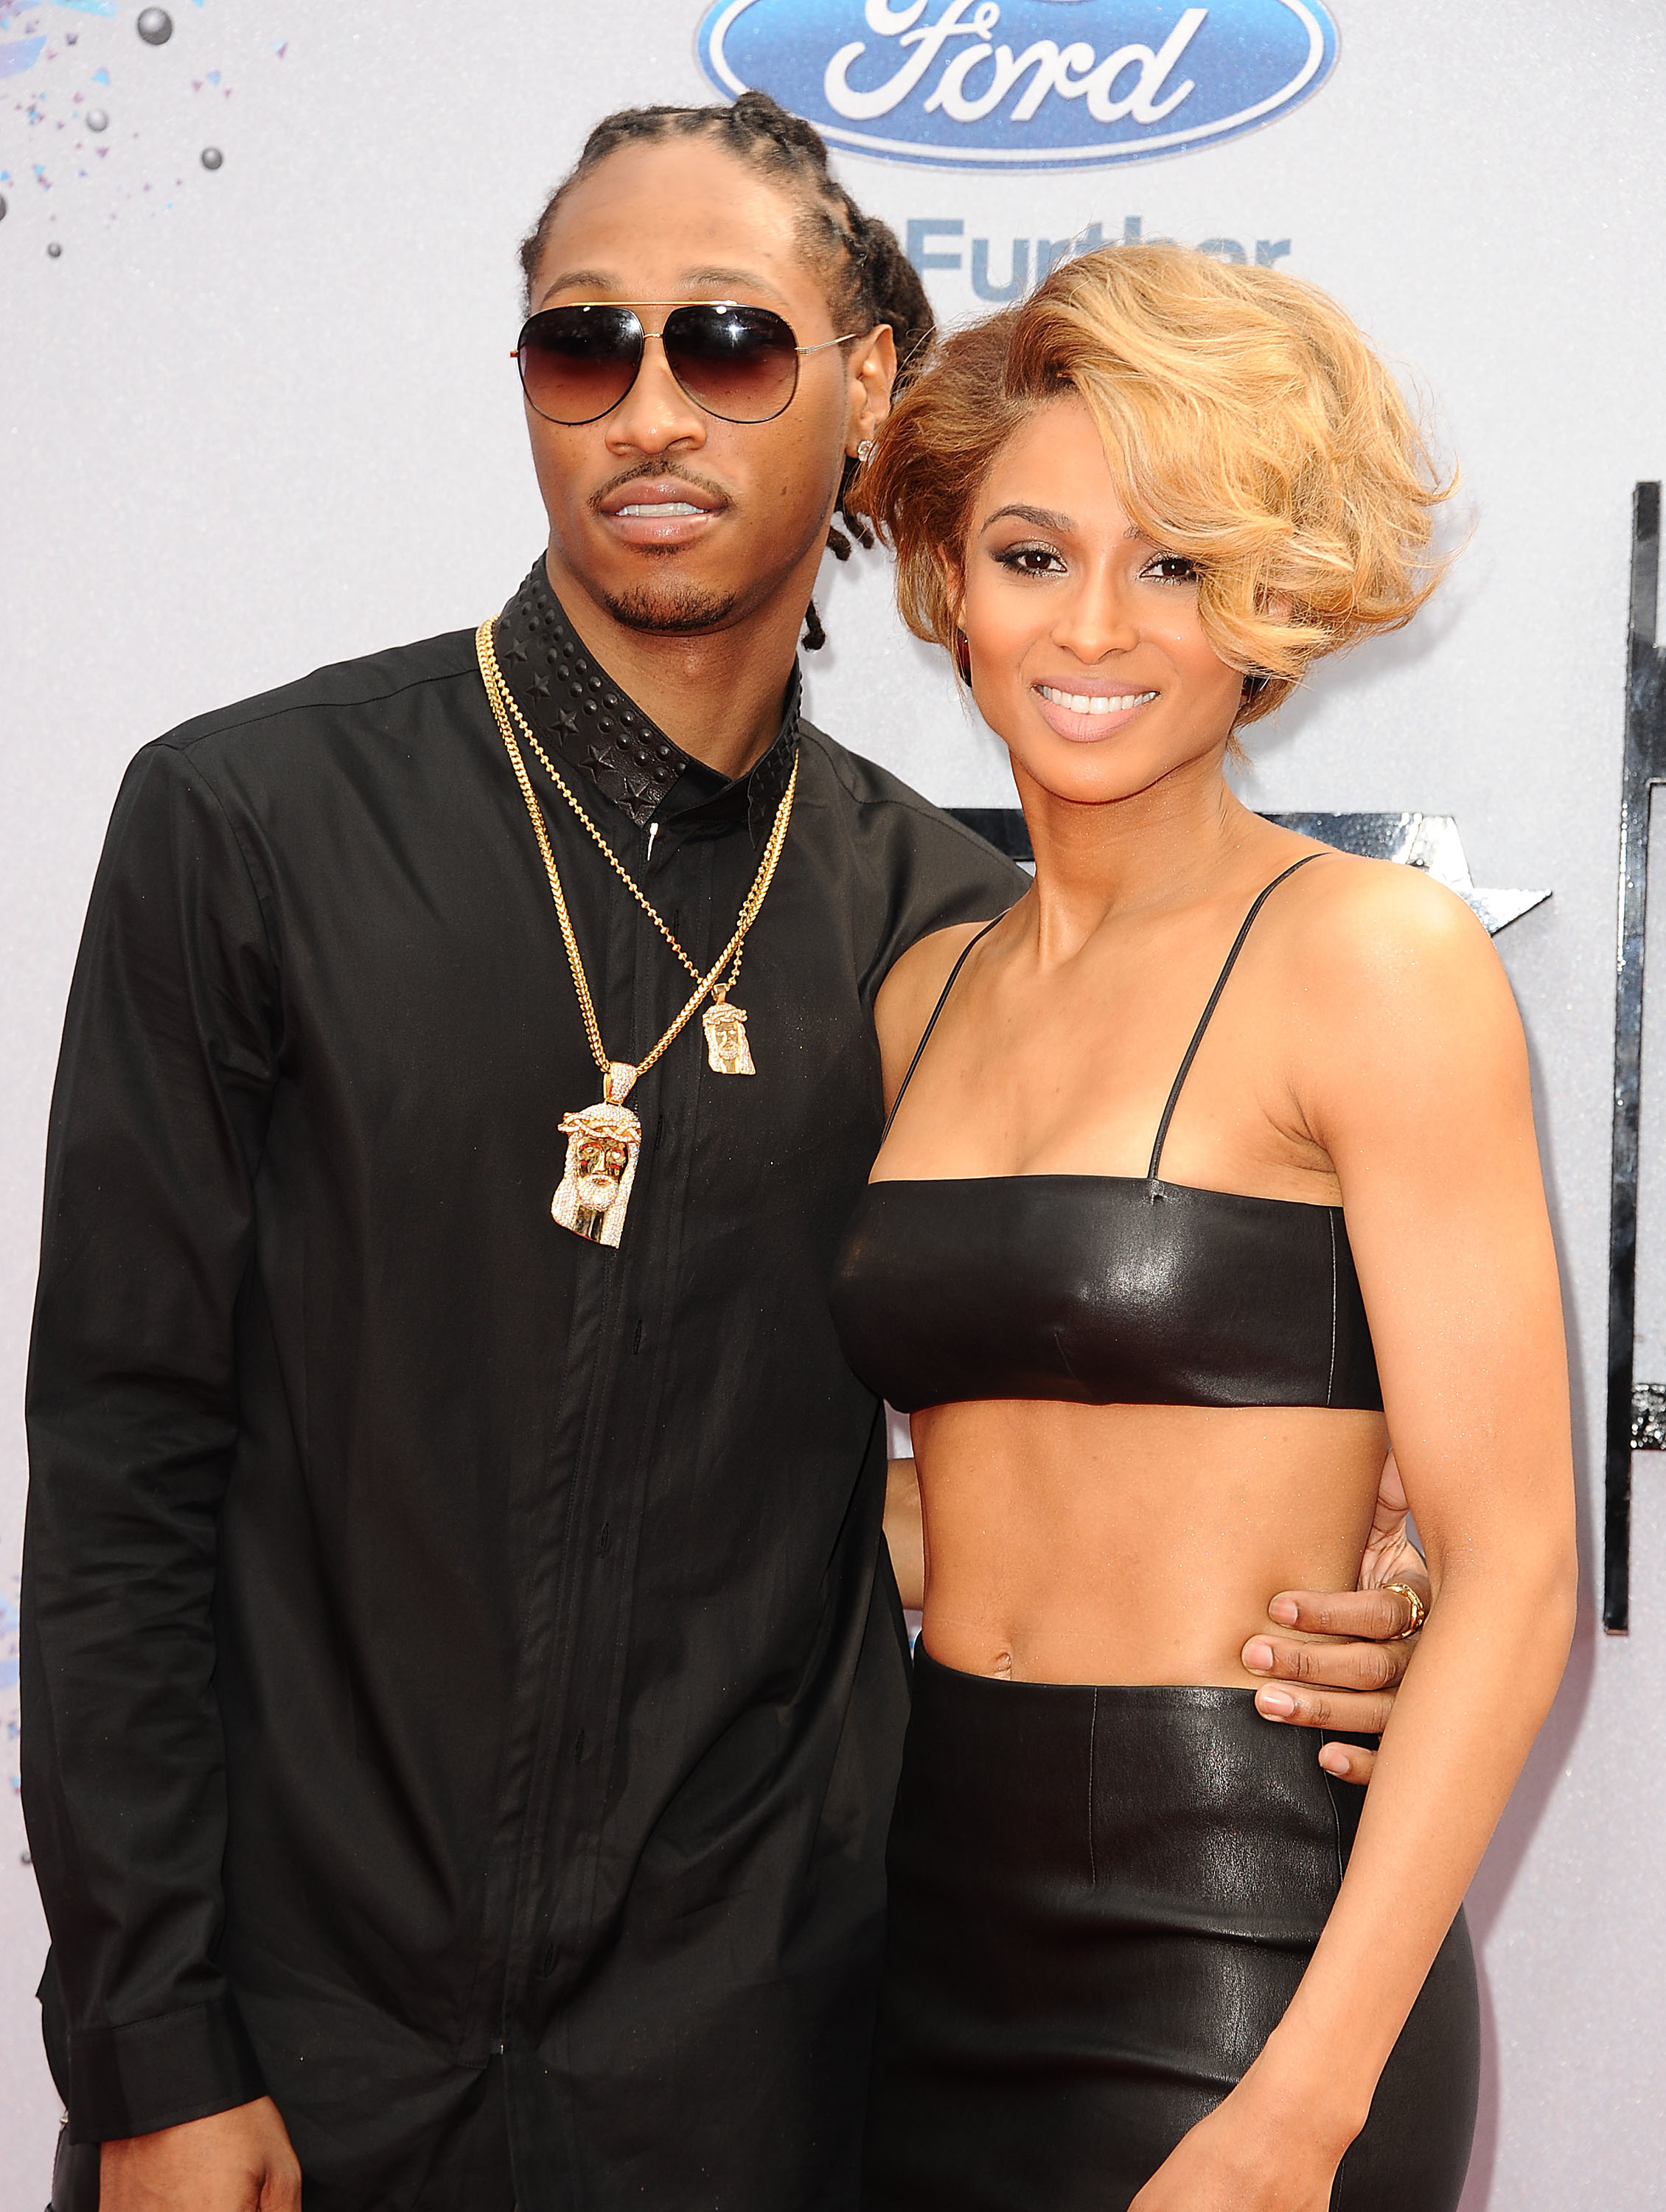 Future in a black shirt and sunglasses, and Ciara in a black crop top outfit